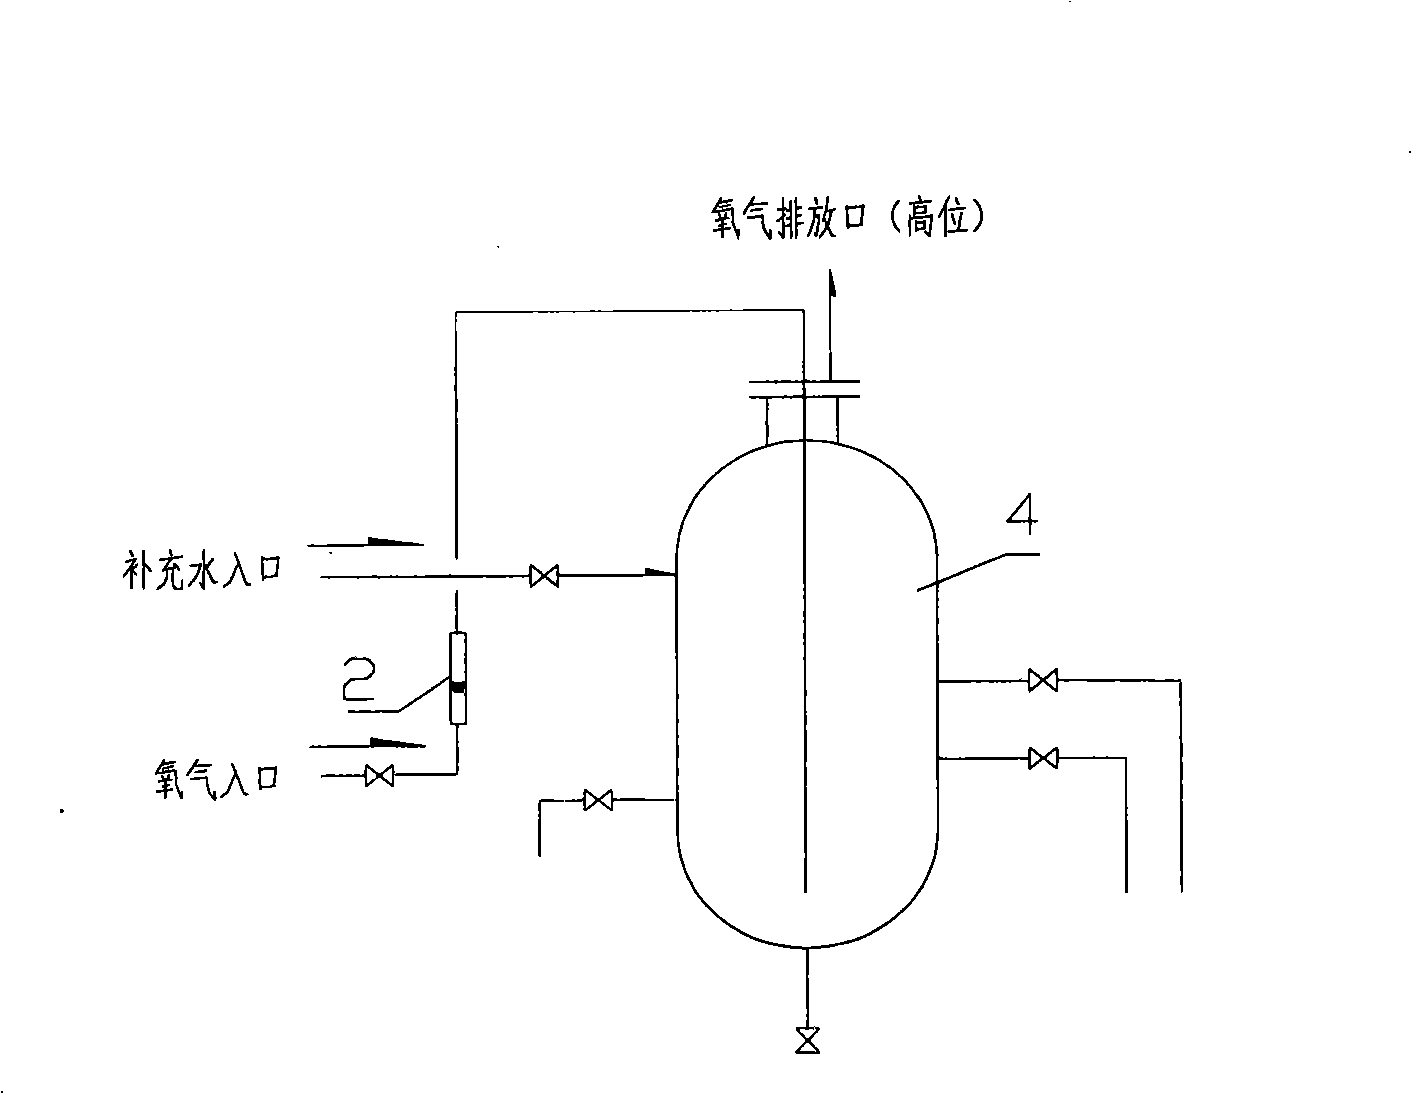 Technique for continuously producing high purity hydrogen by water electrolysis